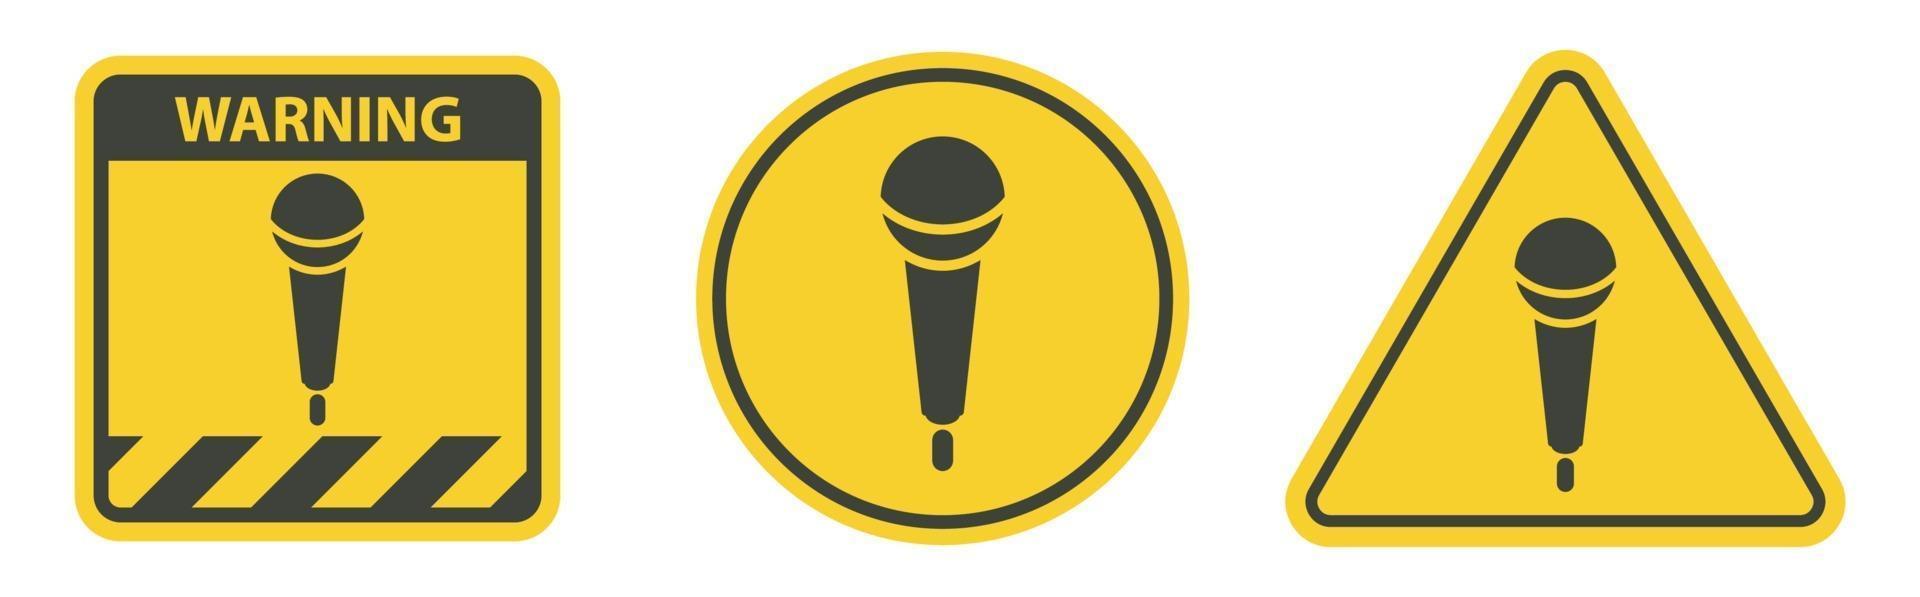 Microphone Icon Symbol on White Background vector